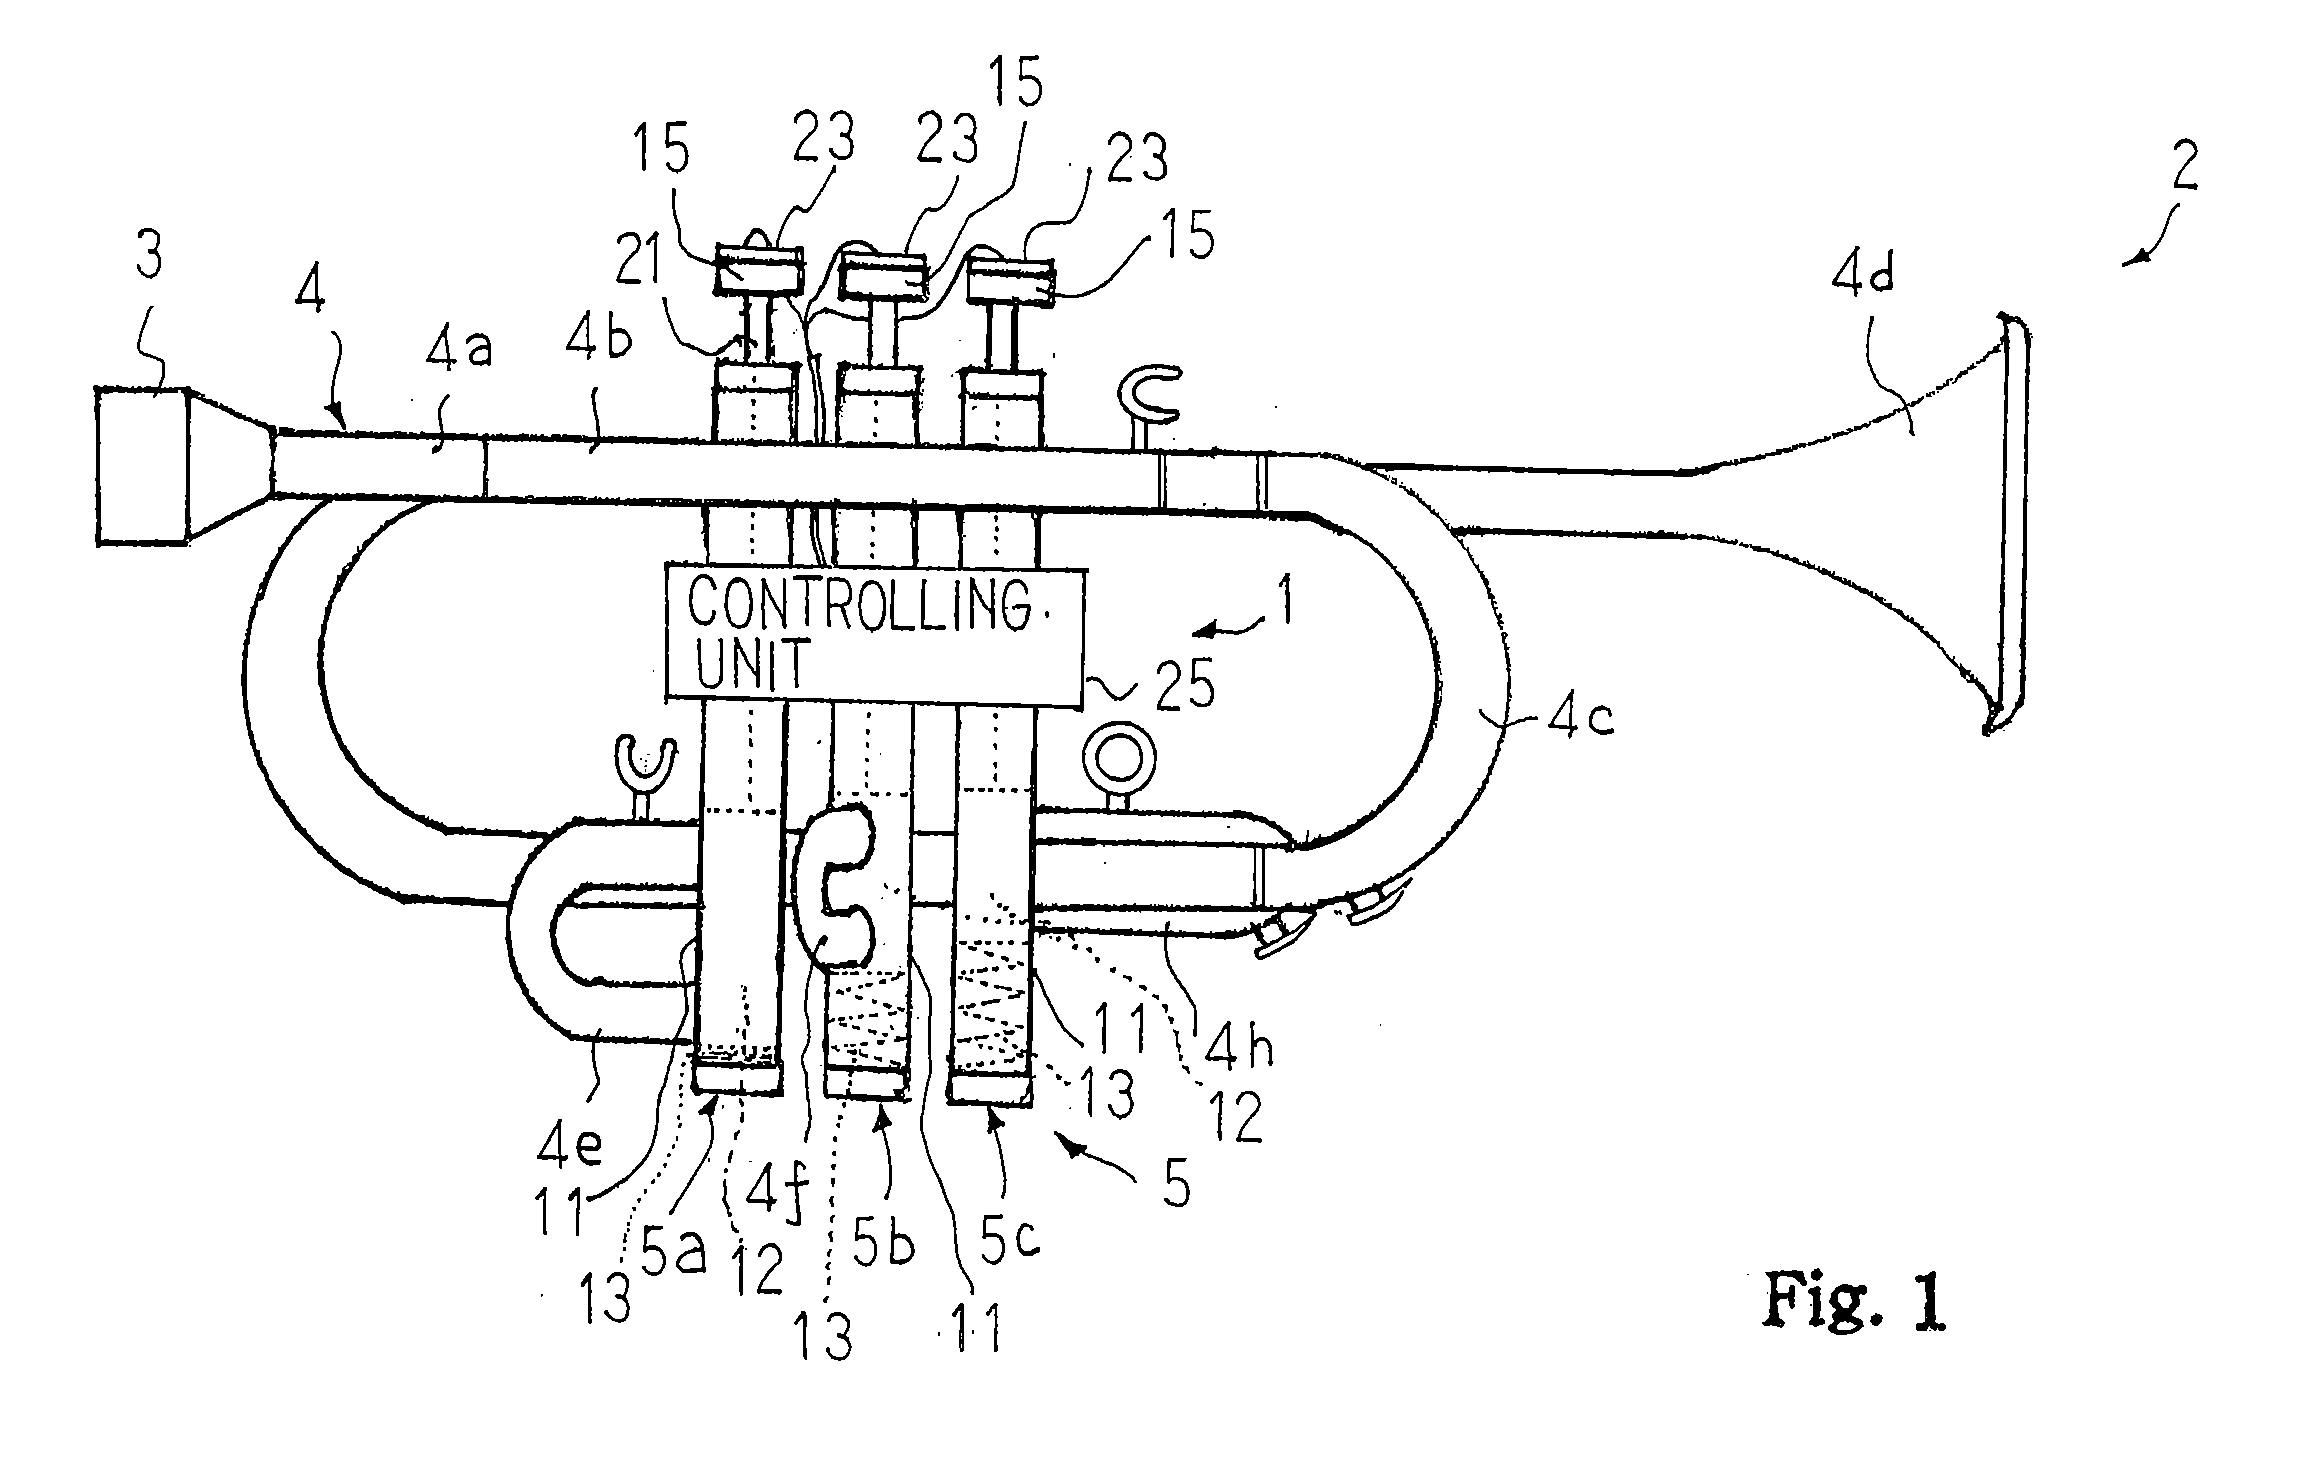 Wind musical instrument with pitch changing mechanism and supporting system for pitch change